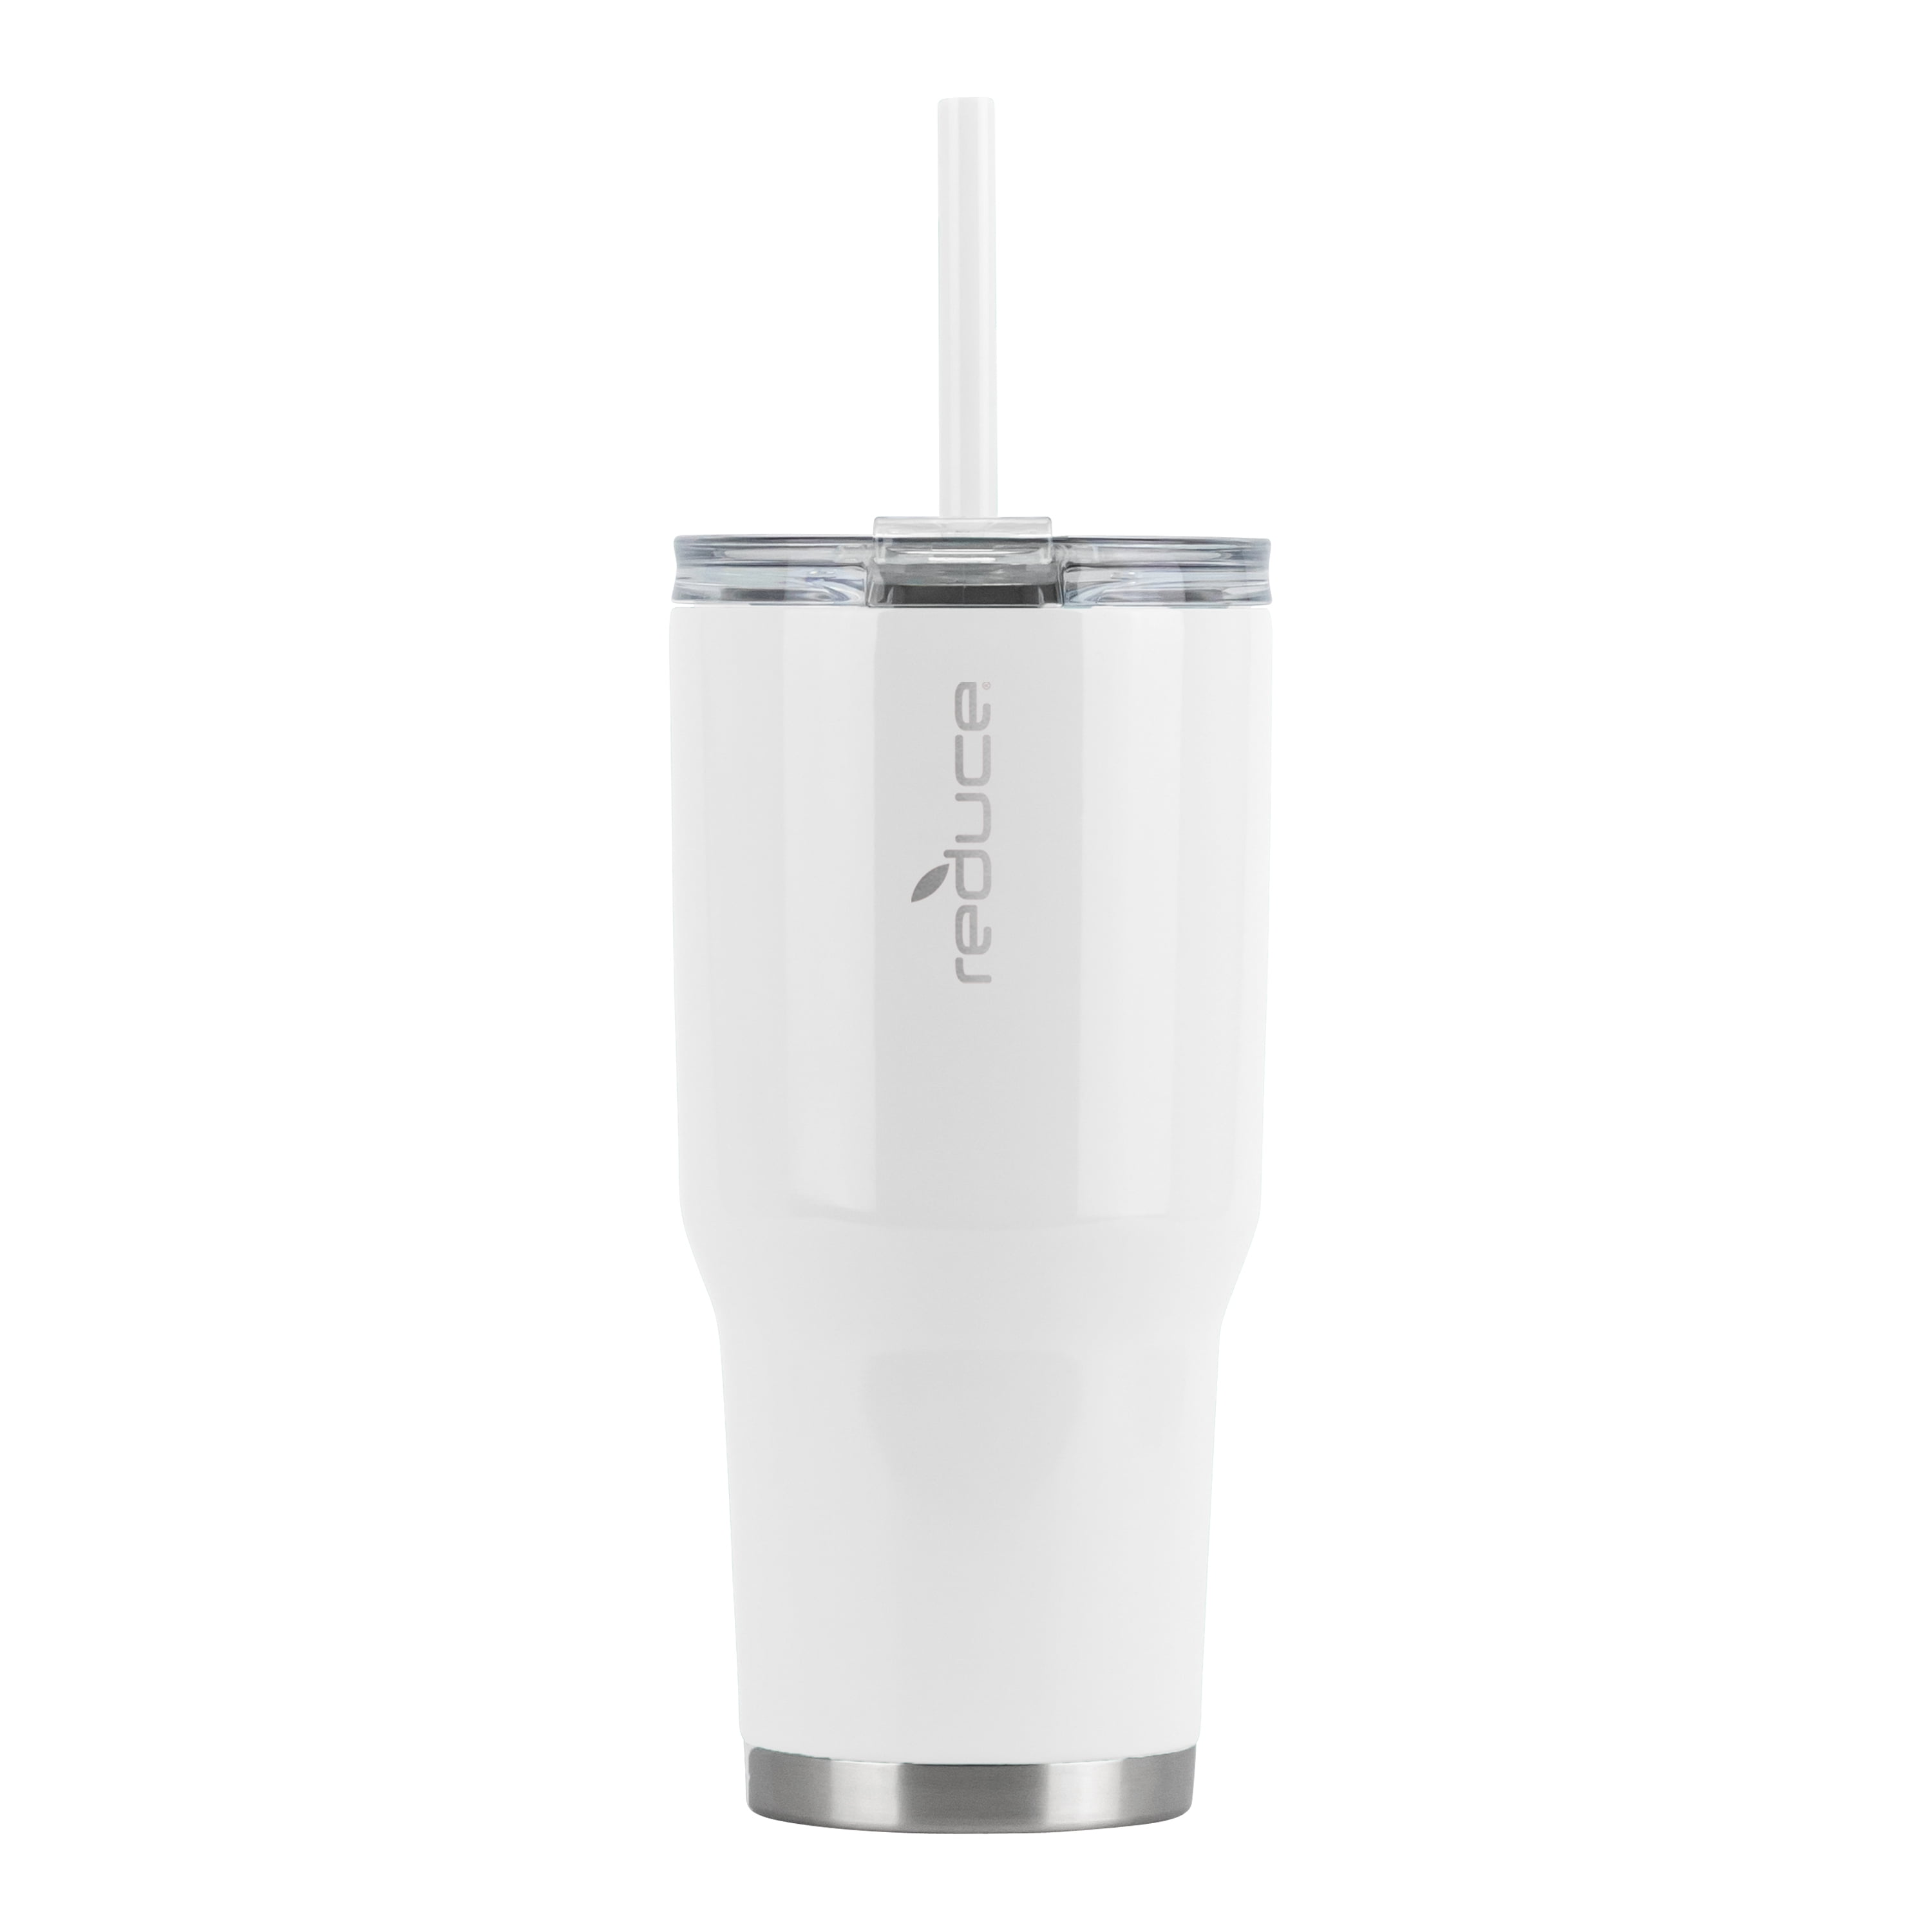 Reduce 24 oz Tumbler, Stainless Steel – Keeps Drinks Cold up to 24